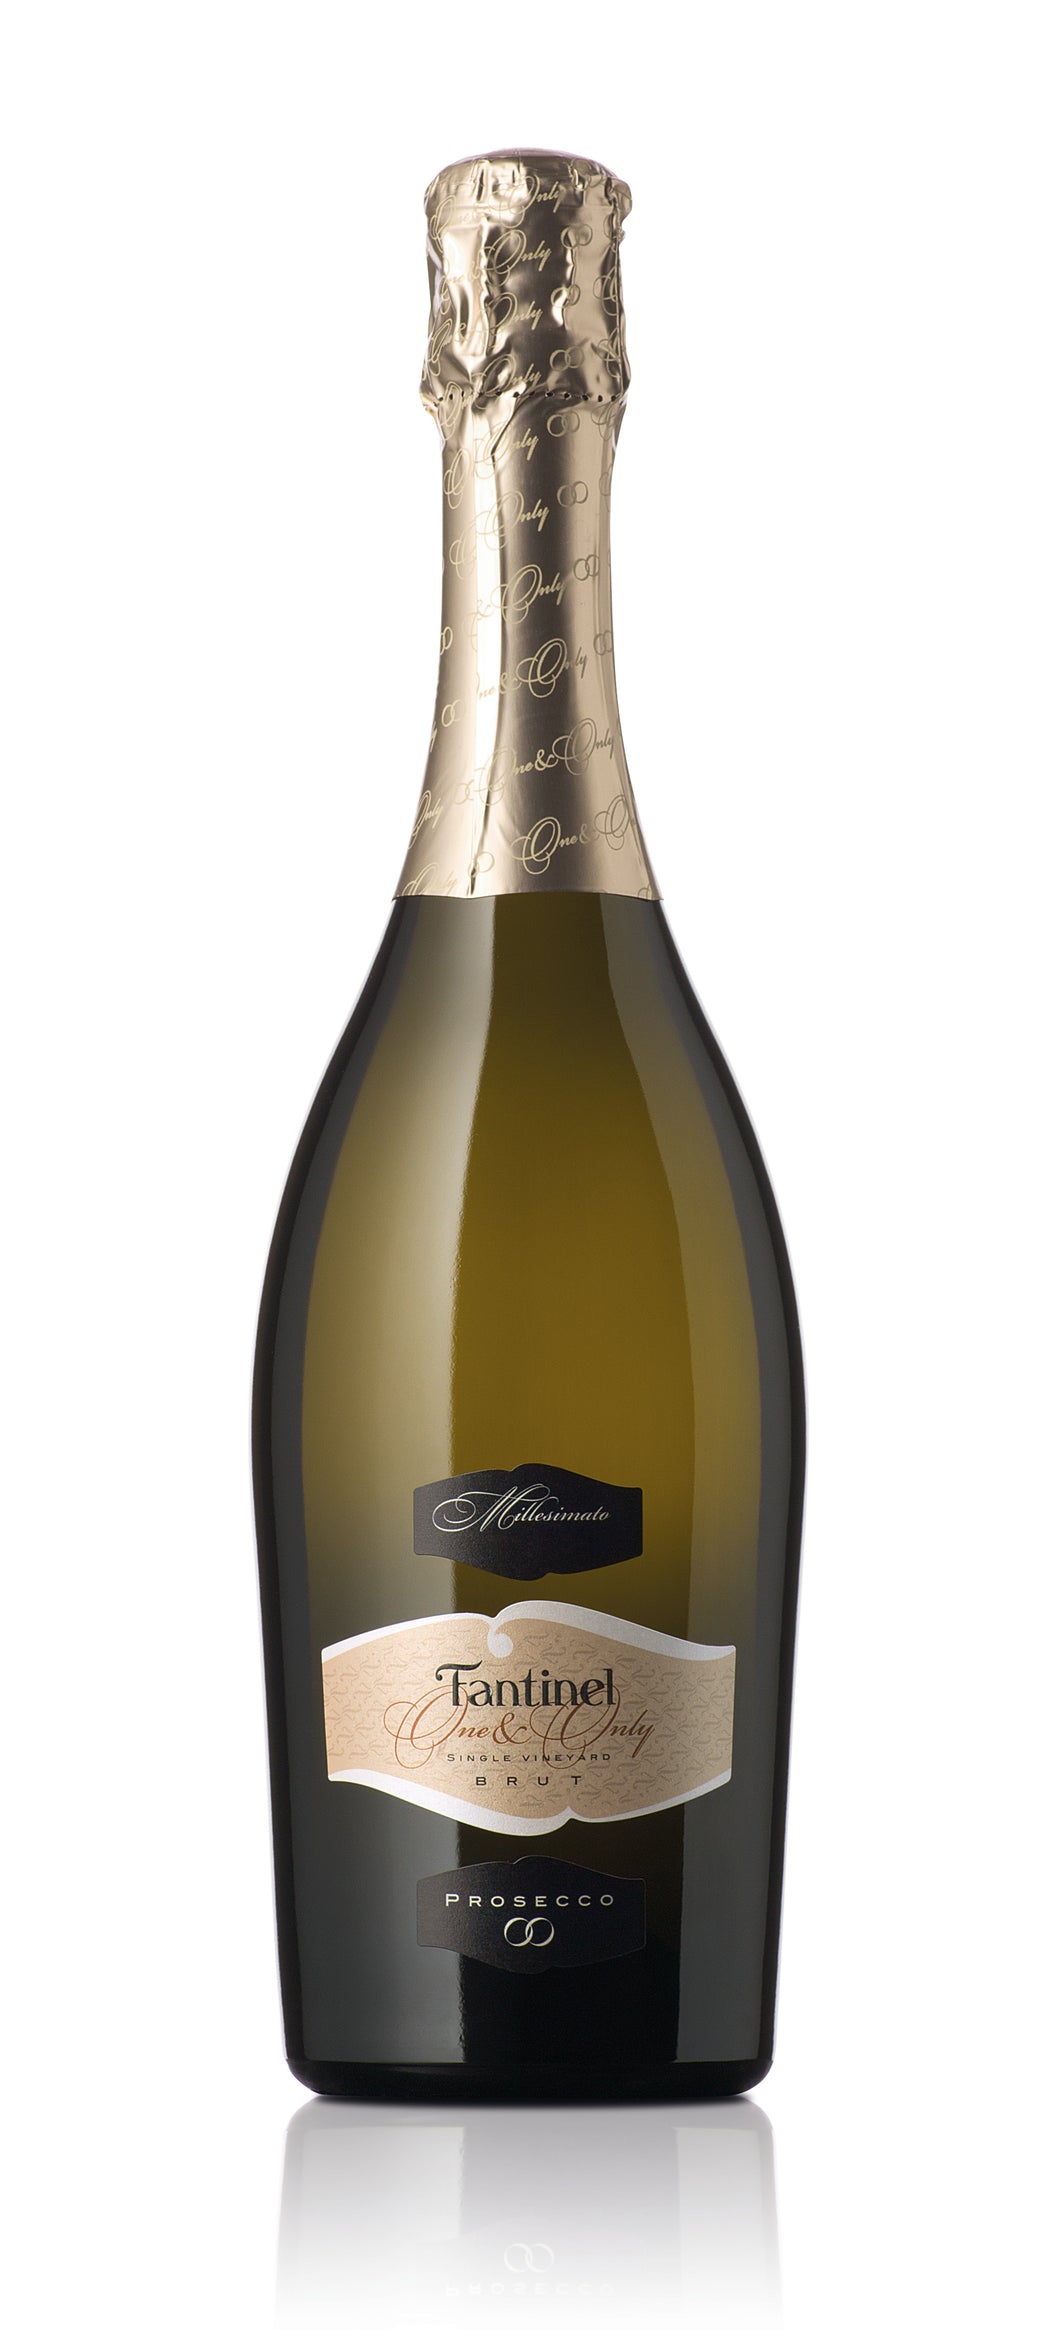 Fantinel Spumante One & Only Prosecco Vintage Brut 2019